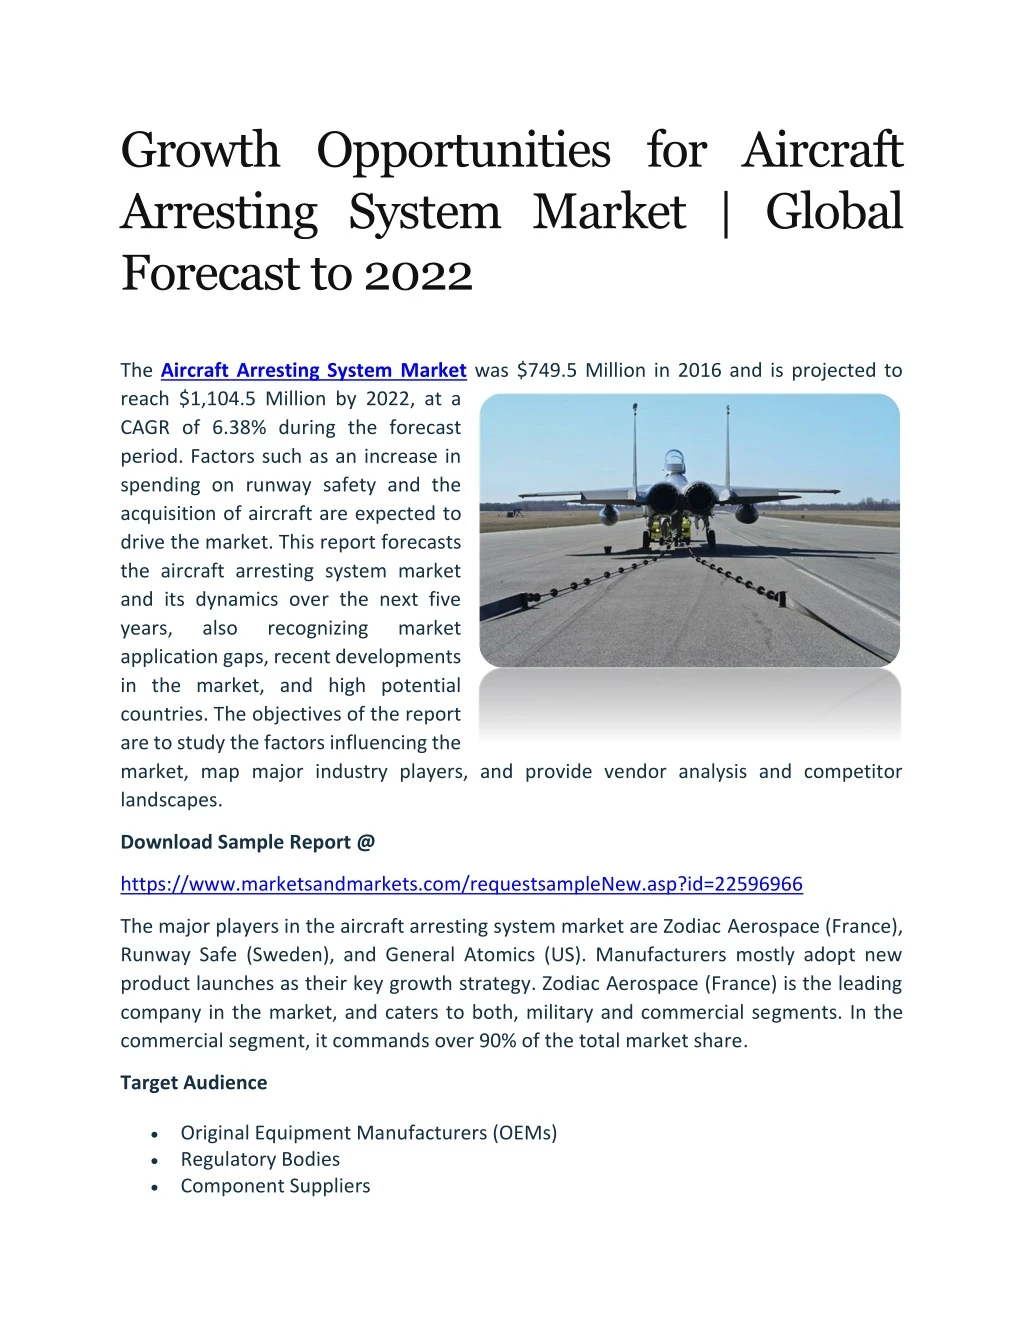 growth opportunities for aircraft arresting